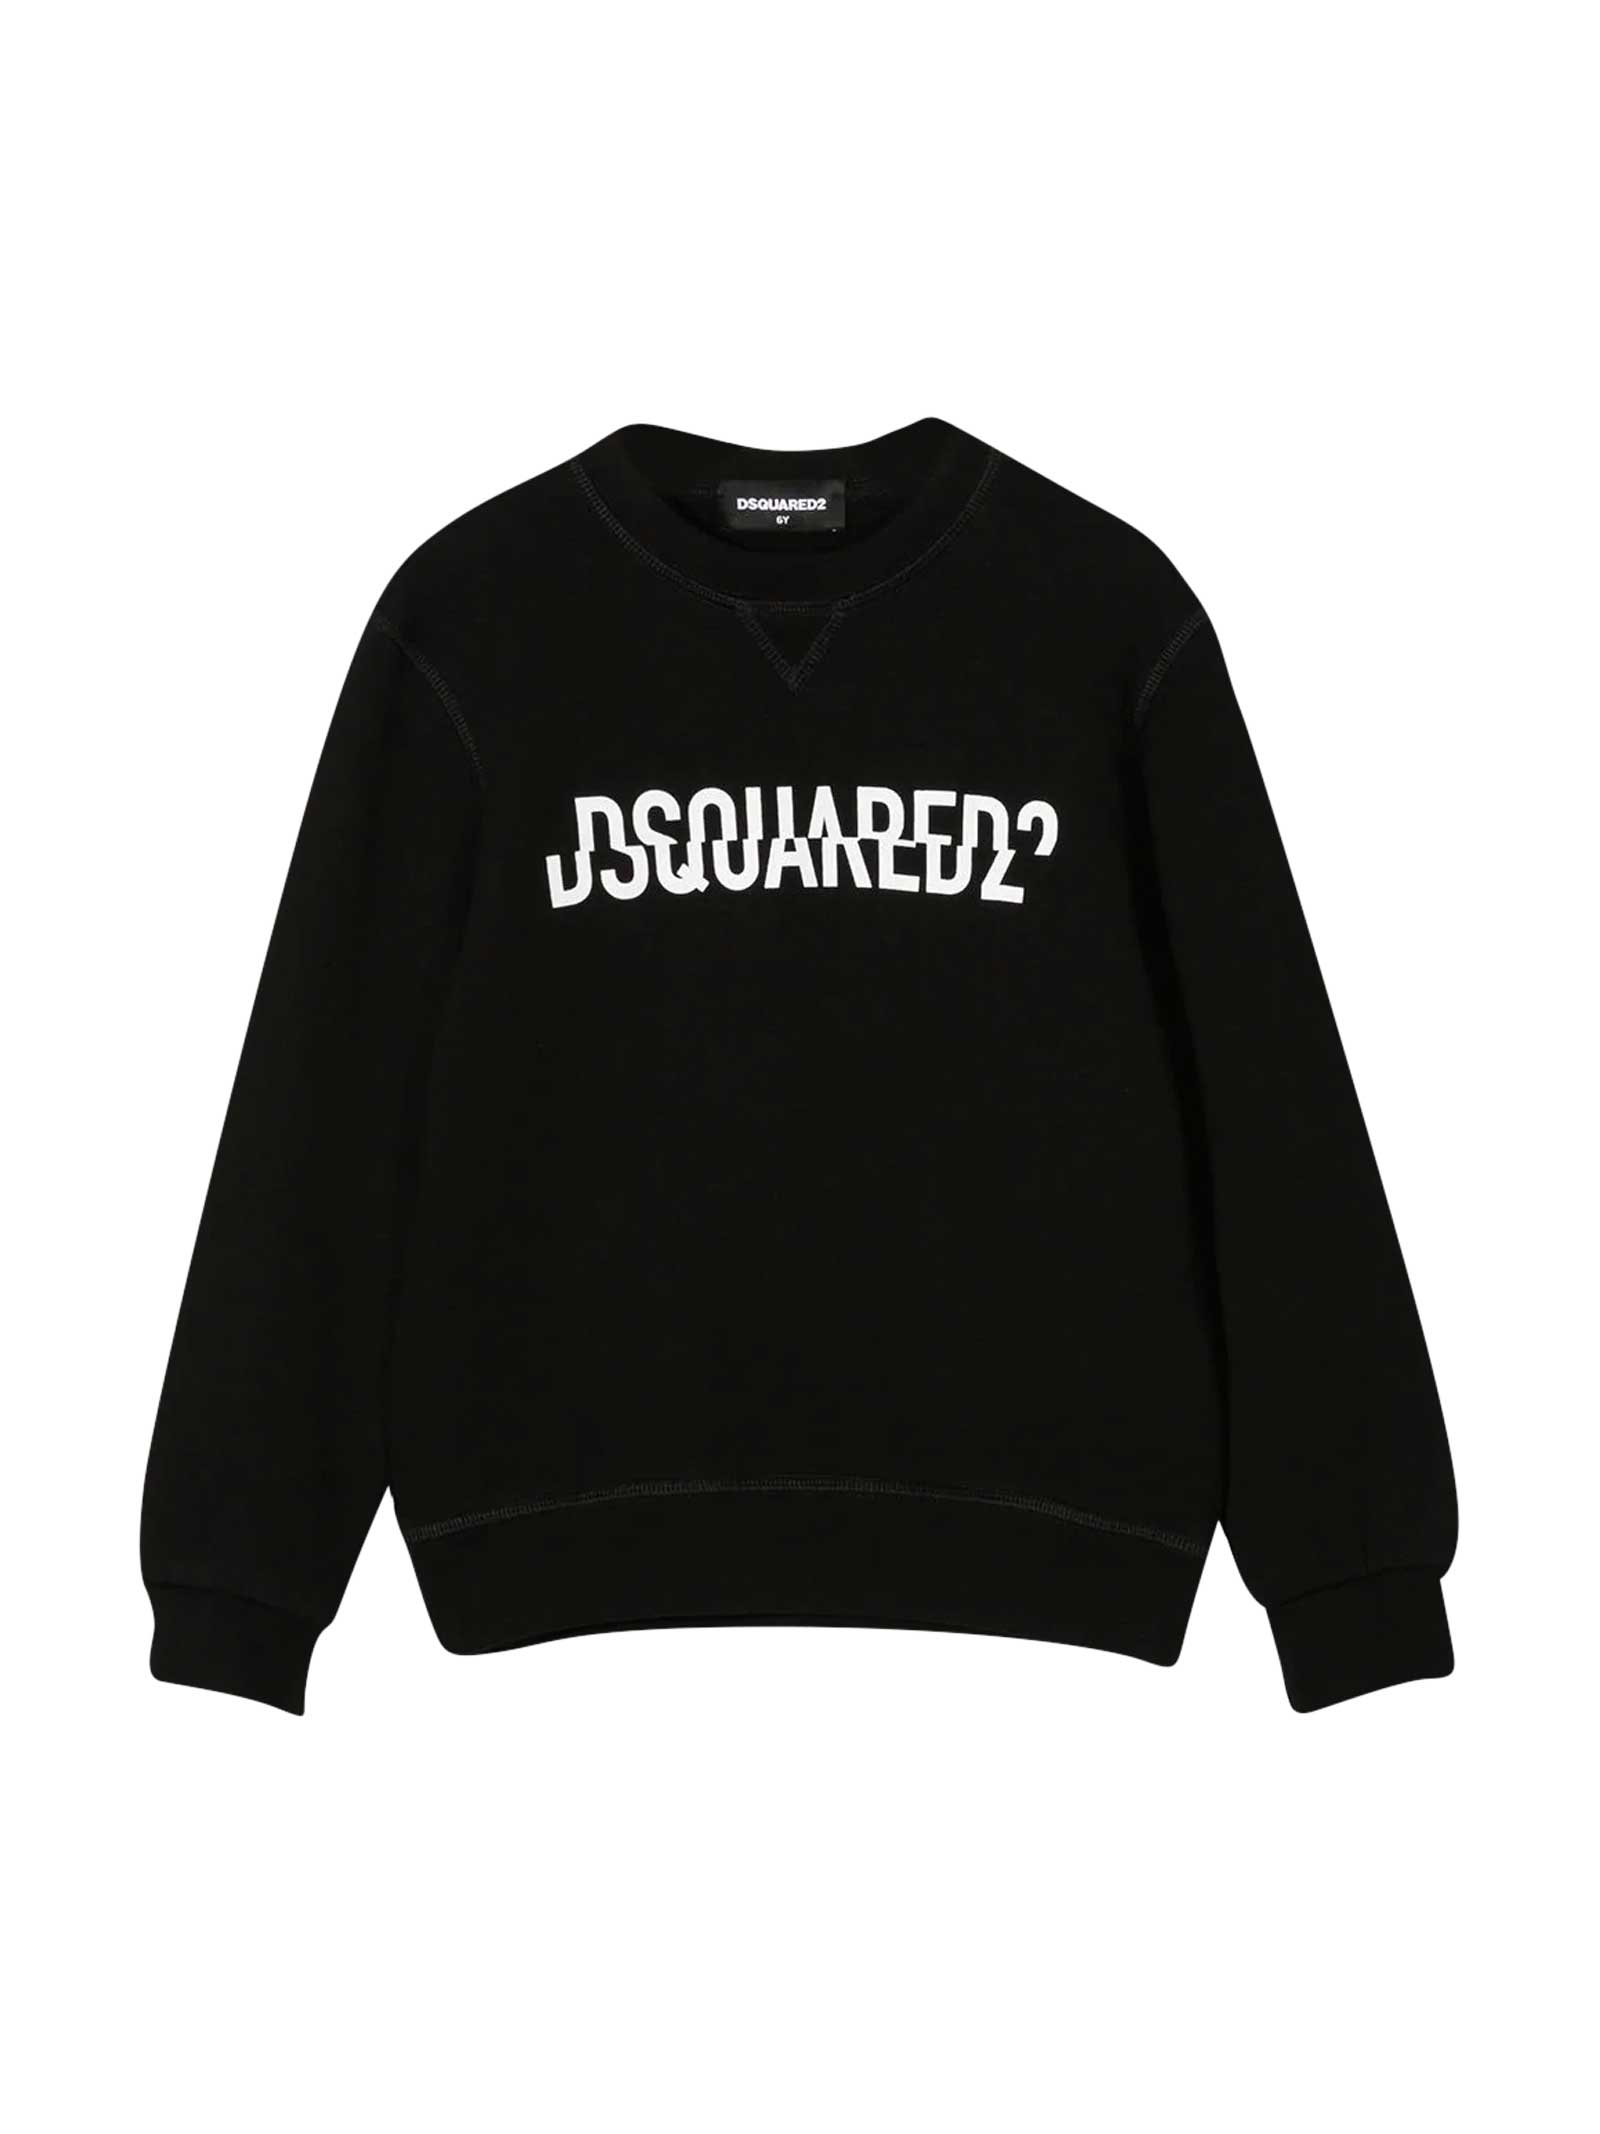 DSQUARED2 BLACK SWEATSHIRT WITH FRONTAL LOGO,DQ0475D002G DQ900